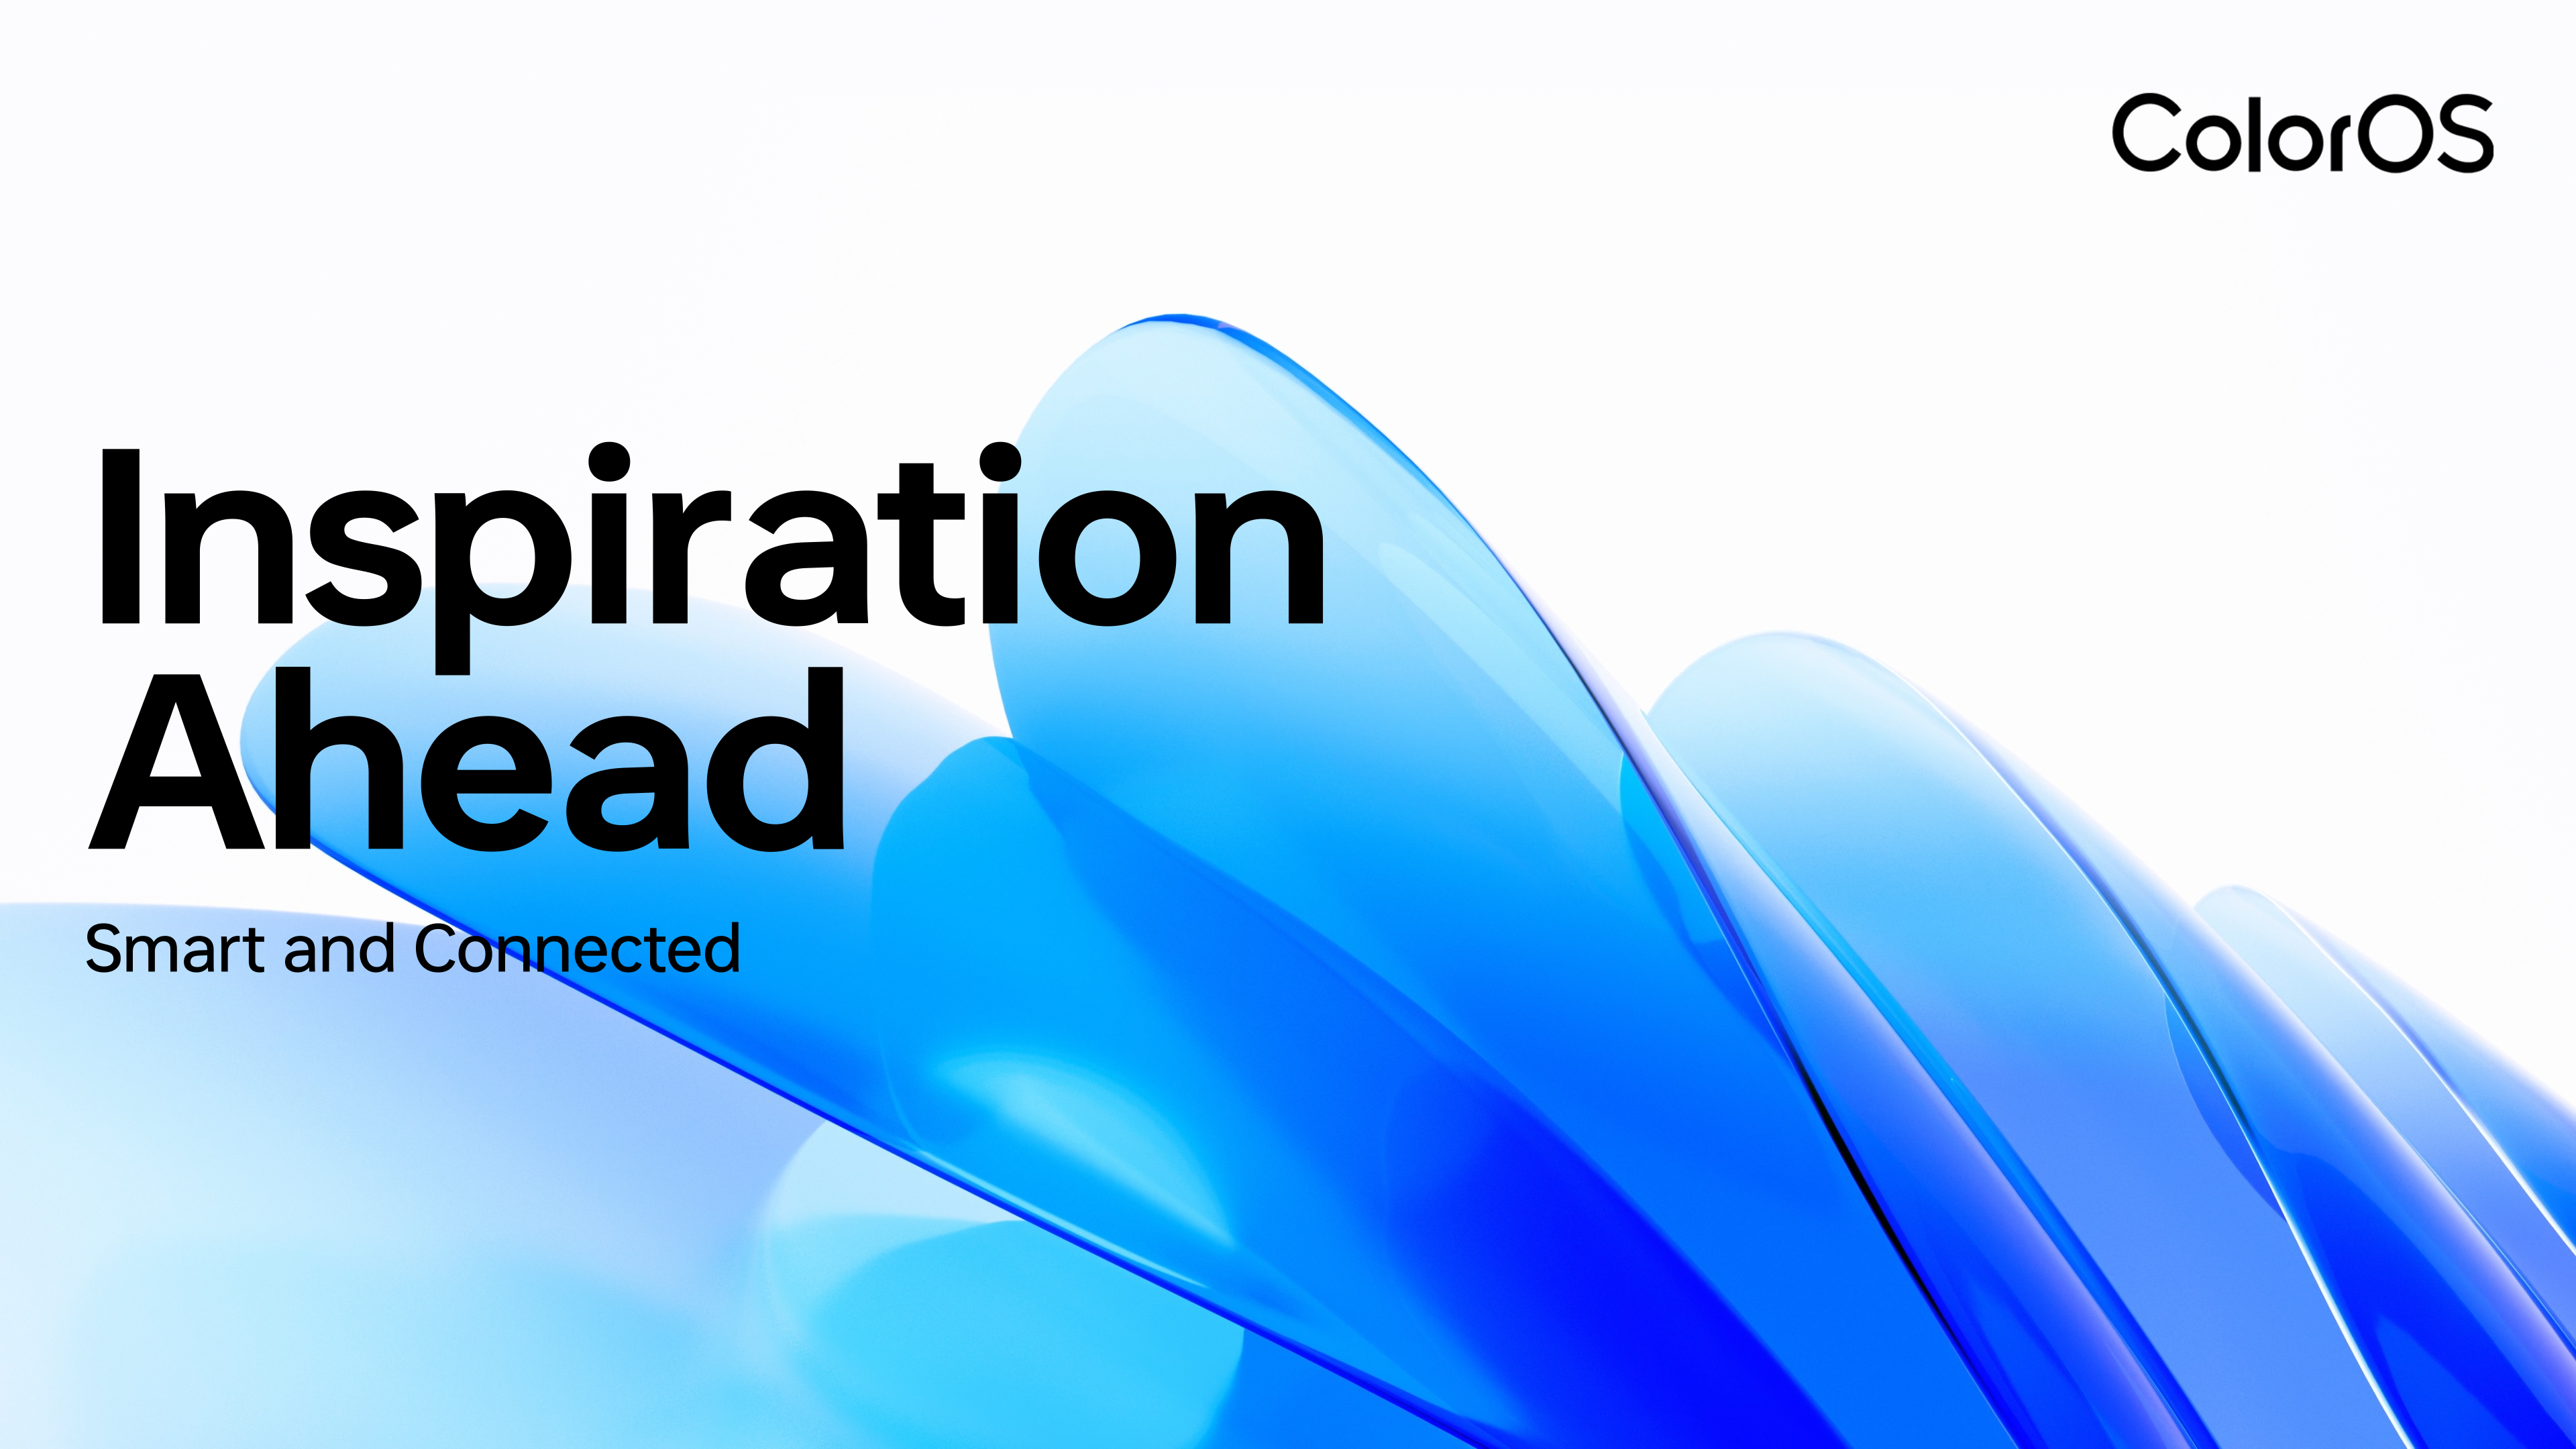 ColorOS 13 - Inspiration Ahead - Smart and Connected